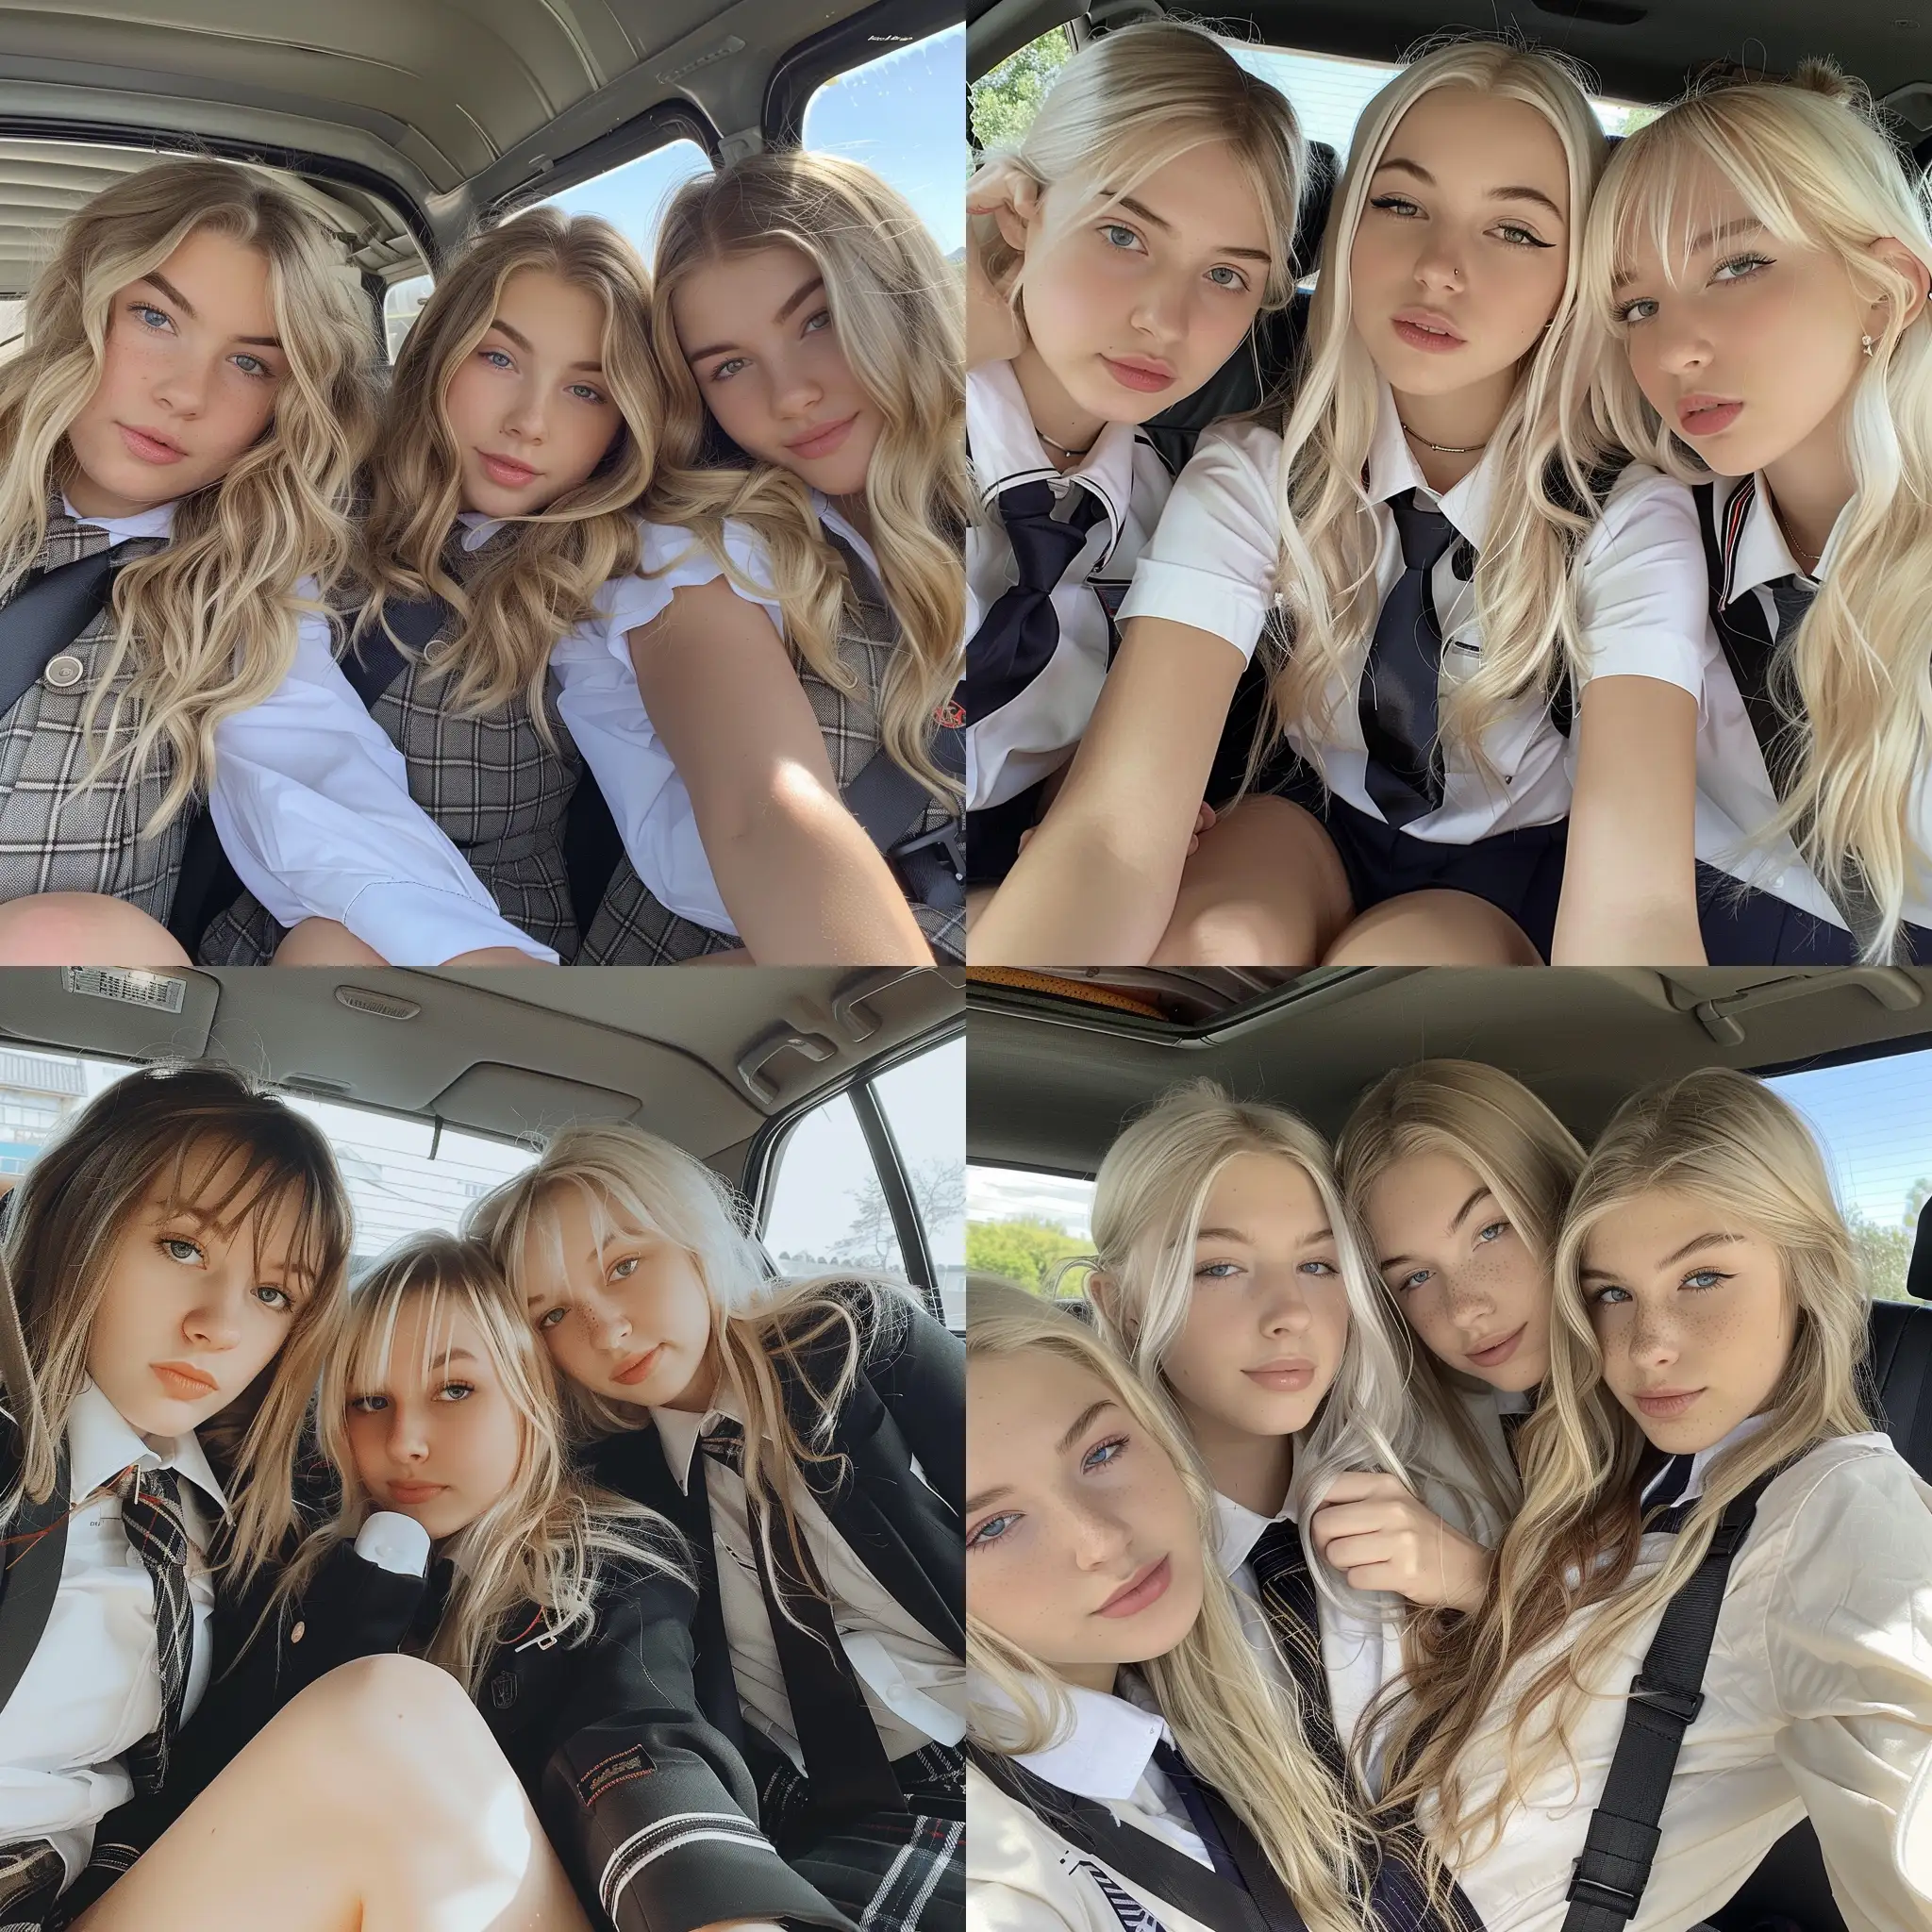 3 girls, 22 years old, blonde hair, school uniform, posing, makeup, inside car, no effects, no filters, natural , iphone photo natural, fat legs --v 6 --ar 3:4 --no 54135